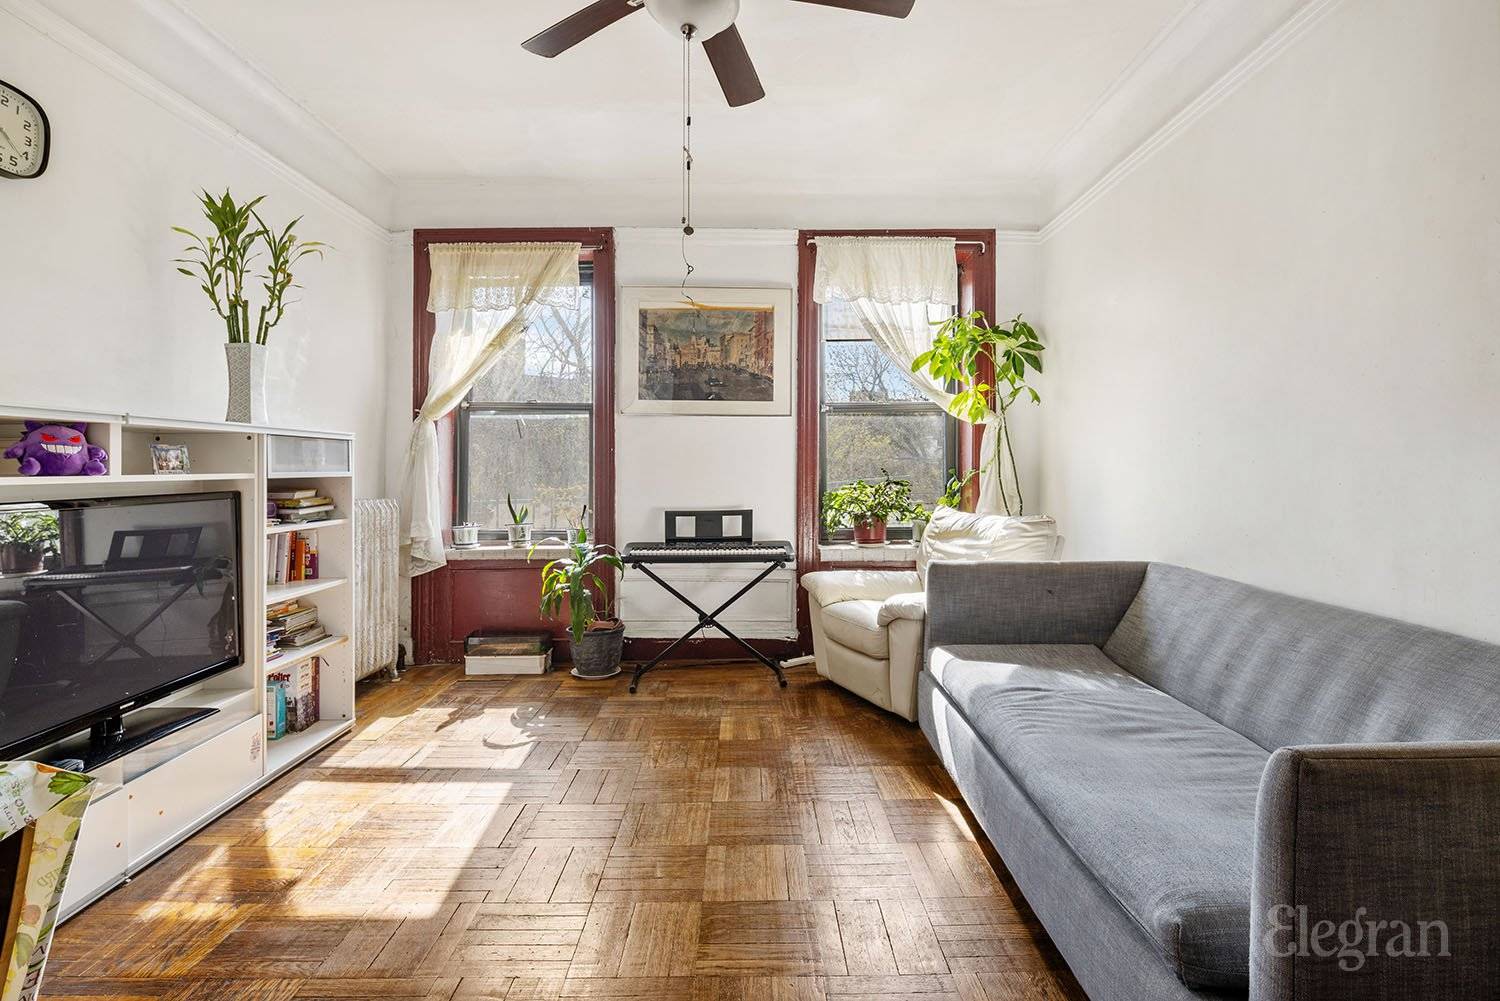 This sprawling pre war 4 bedroom 2 baths is situated in one of the most beautiful historical neighborhoods in Upper Manhattan.